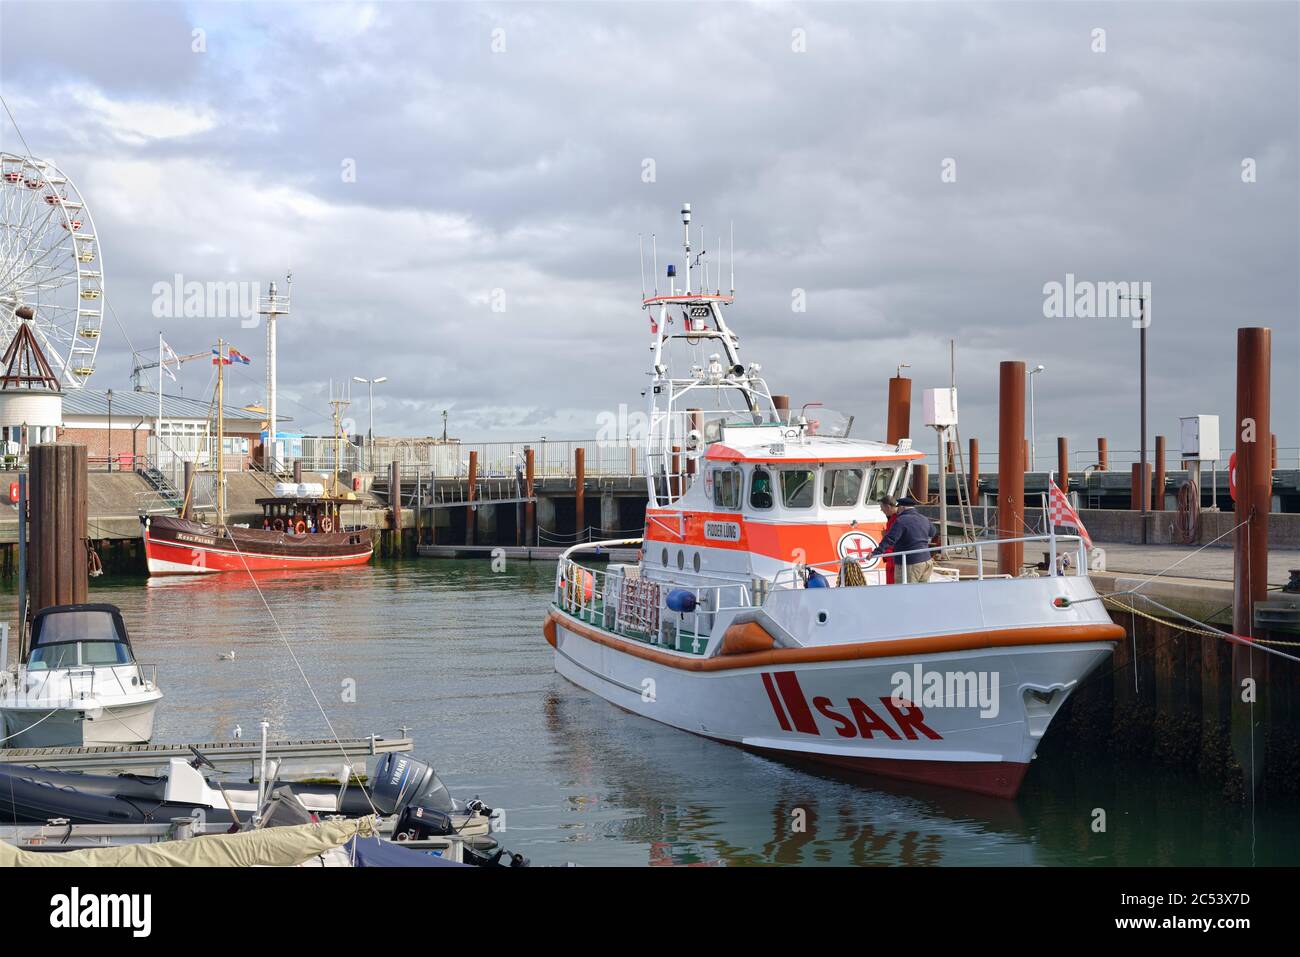 SAR boat, Search and Rescue vessel in the port of List on the island of Sylt, Germany. Stock Photo